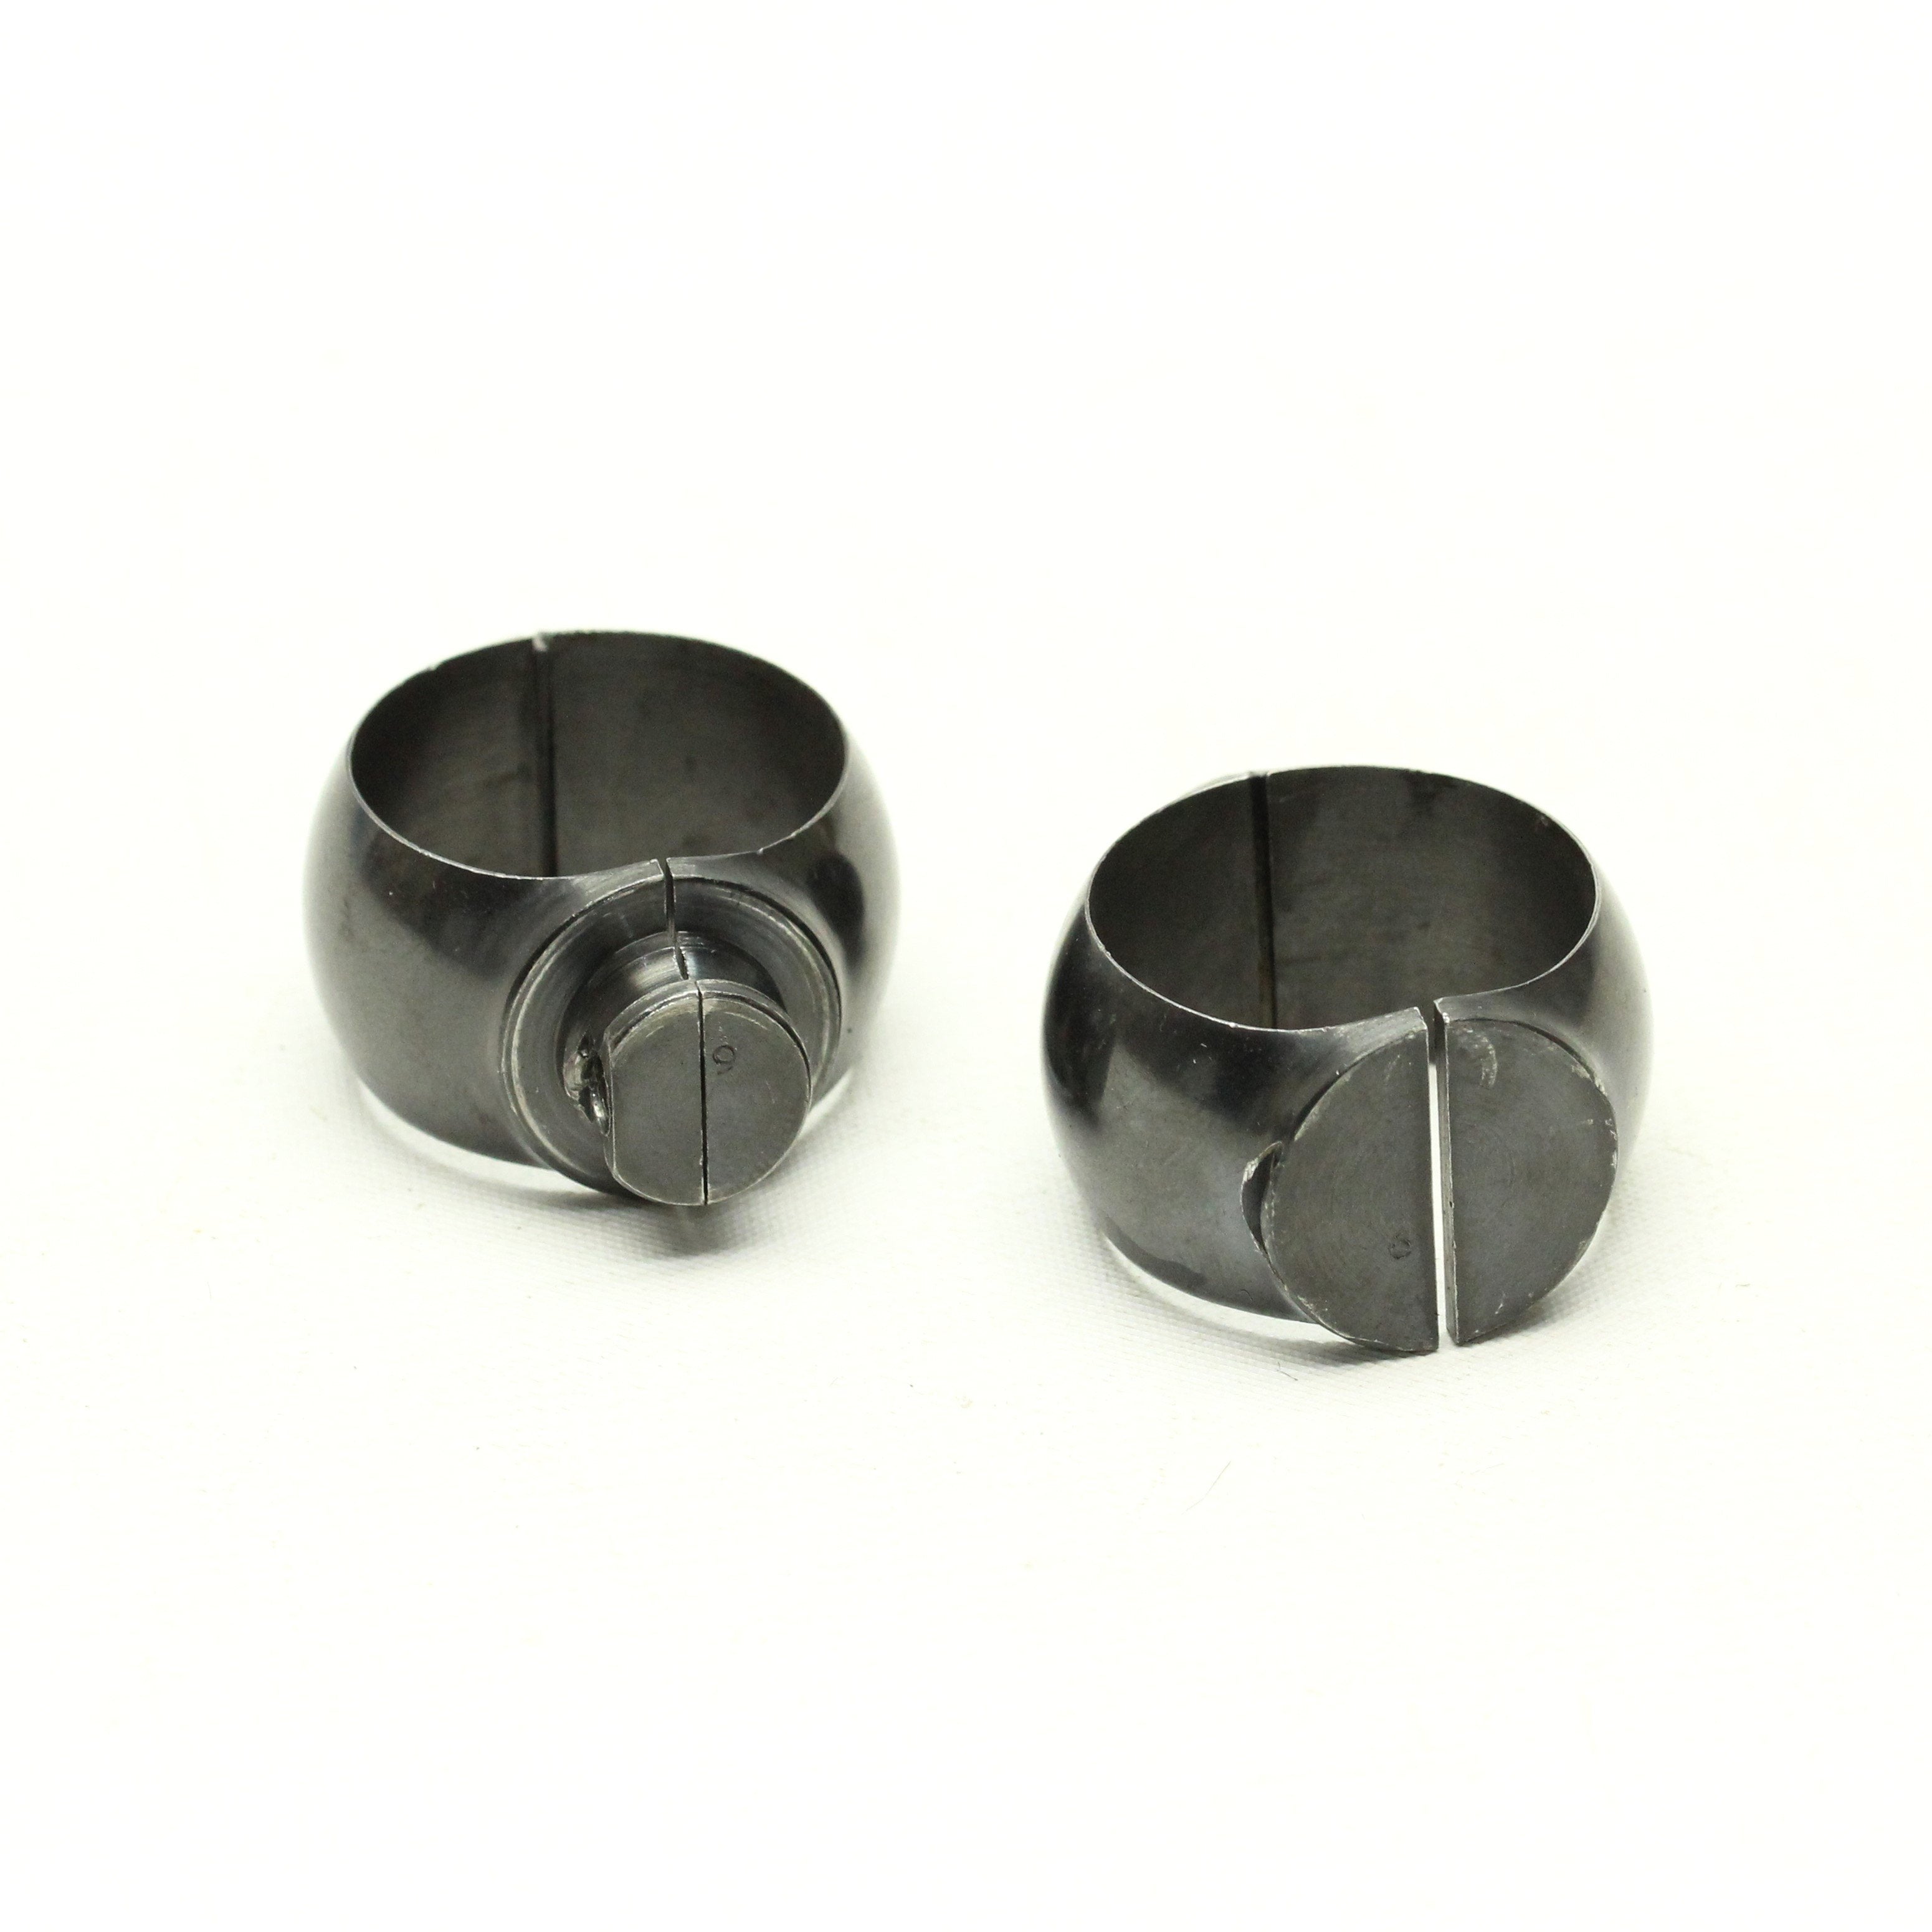 Buehler 1" Two-Piece Scope Rings